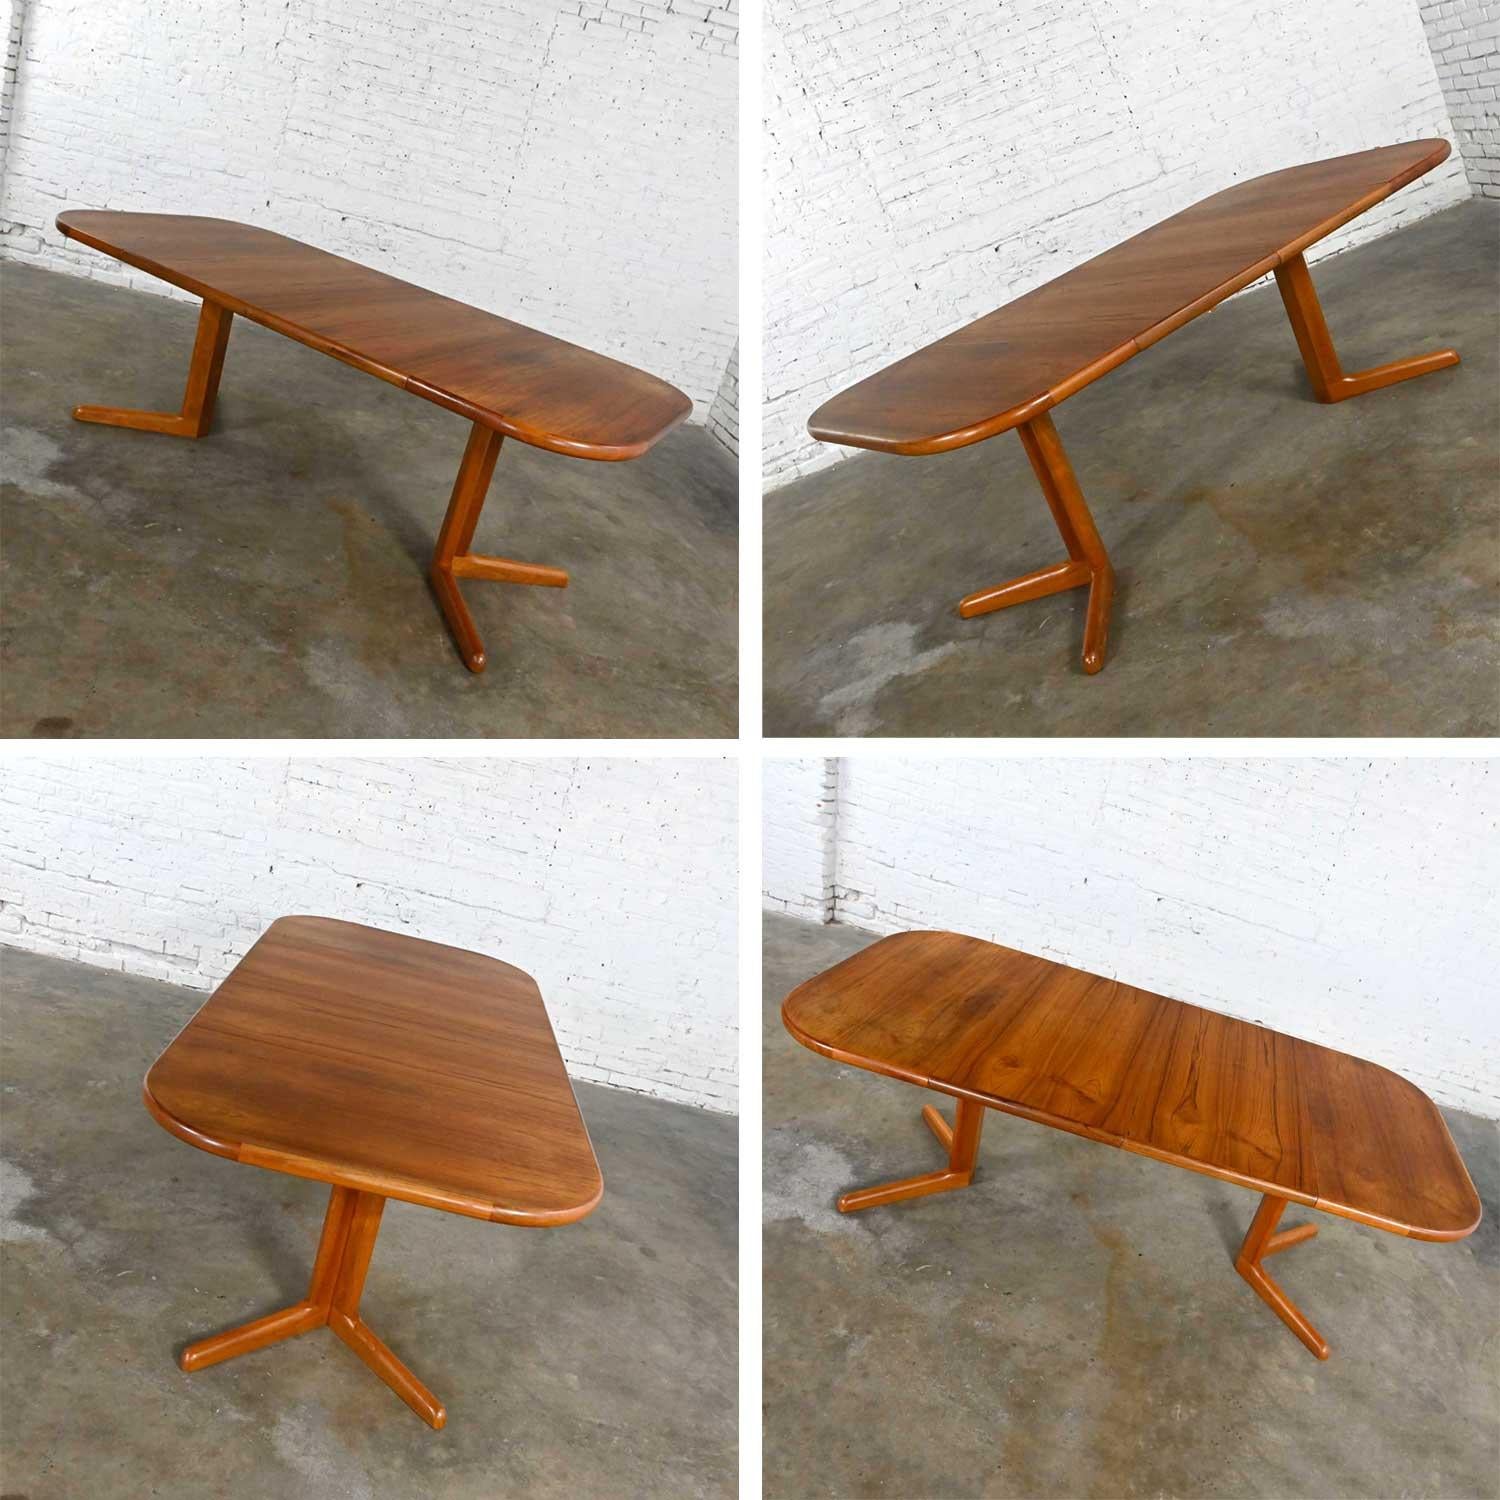 Teak Scandinavian Modern Expanding Dining Table 2 Leaves Style Niels Moller In Good Condition For Sale In Topeka, KS